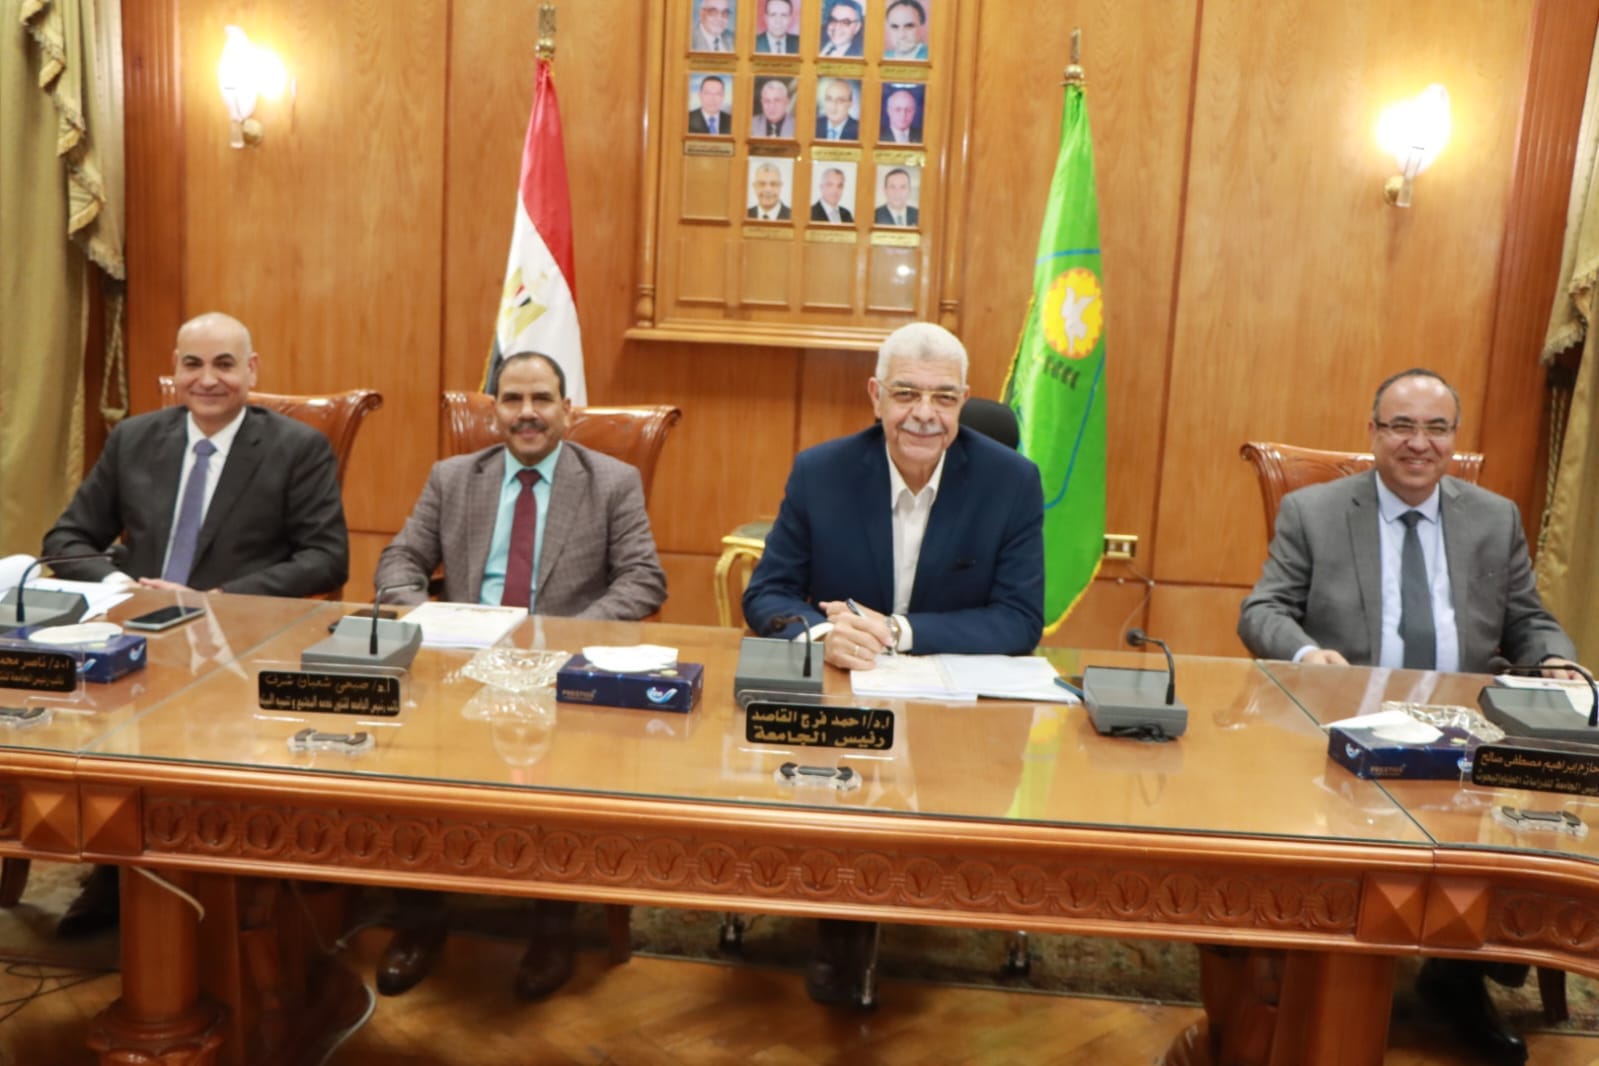 The President of Menoufia University chairs the requirements committee and discusses the five-year plan for appointing teaching assistants